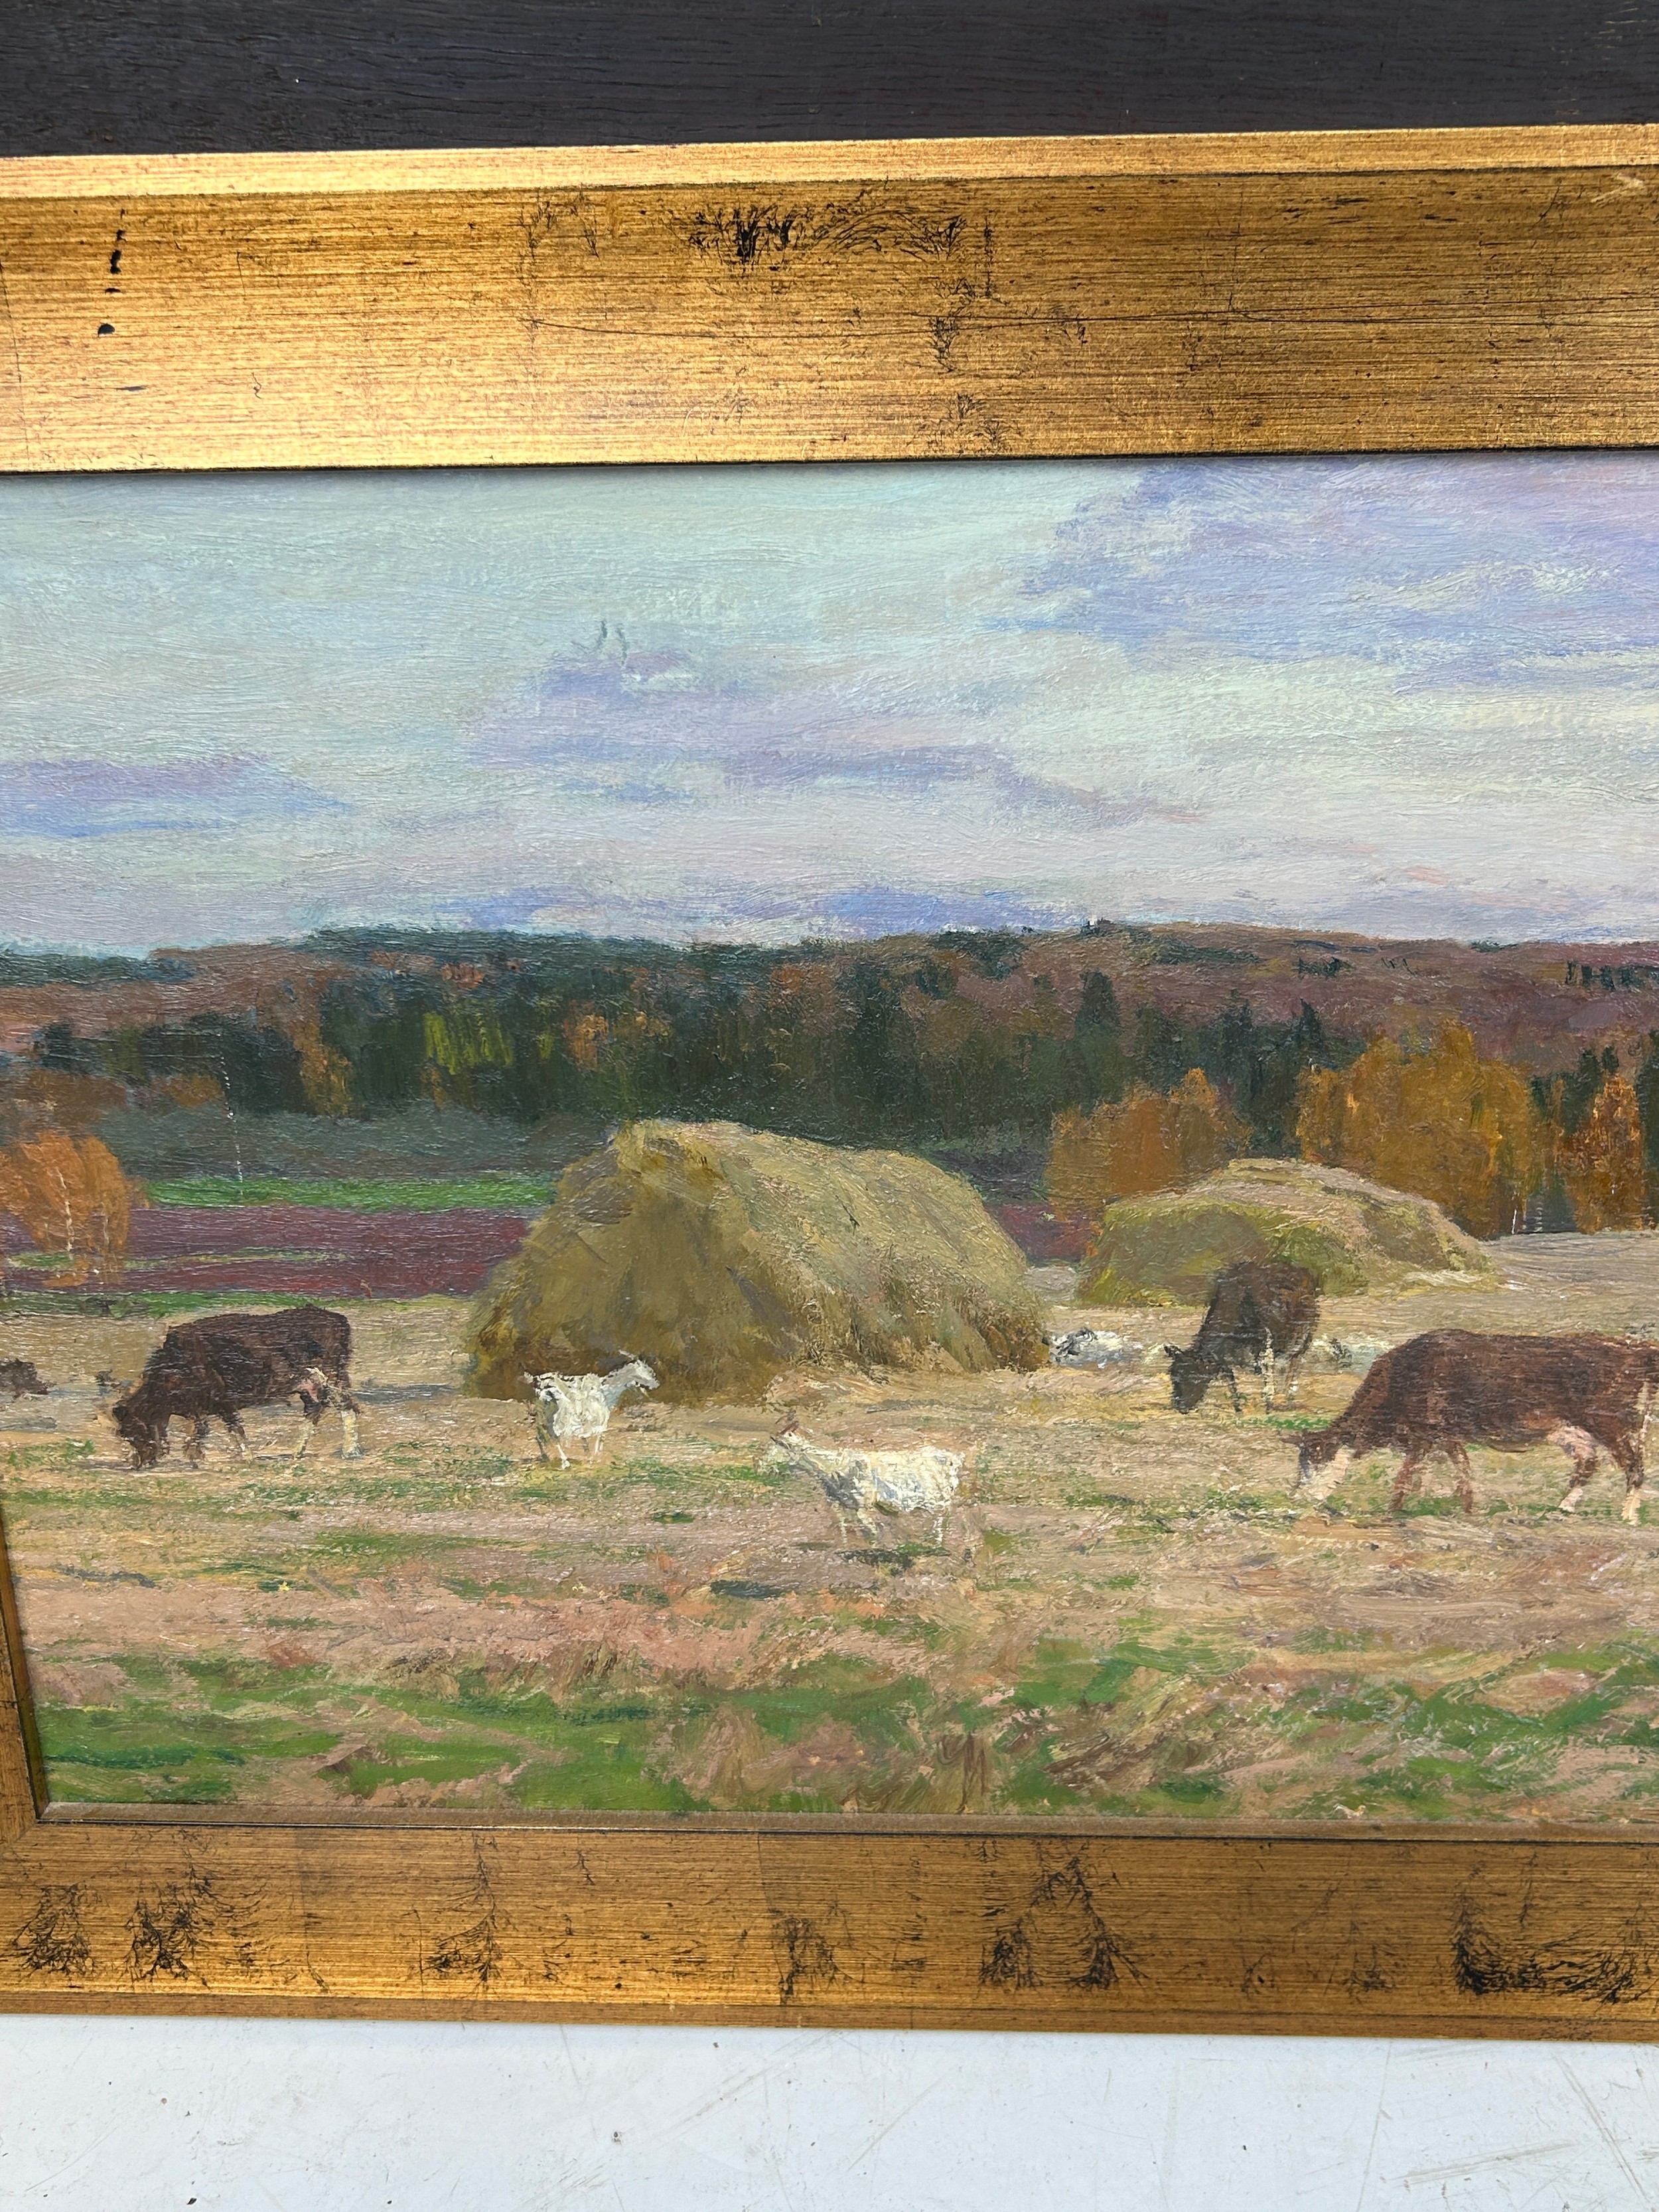 ALEKSEI MIKHAILOVICH GRITSAI (1914-1998): AN OIL ON BOARD PAINTING DEPICTING CATTLE IN A FIELD - Image 6 of 8